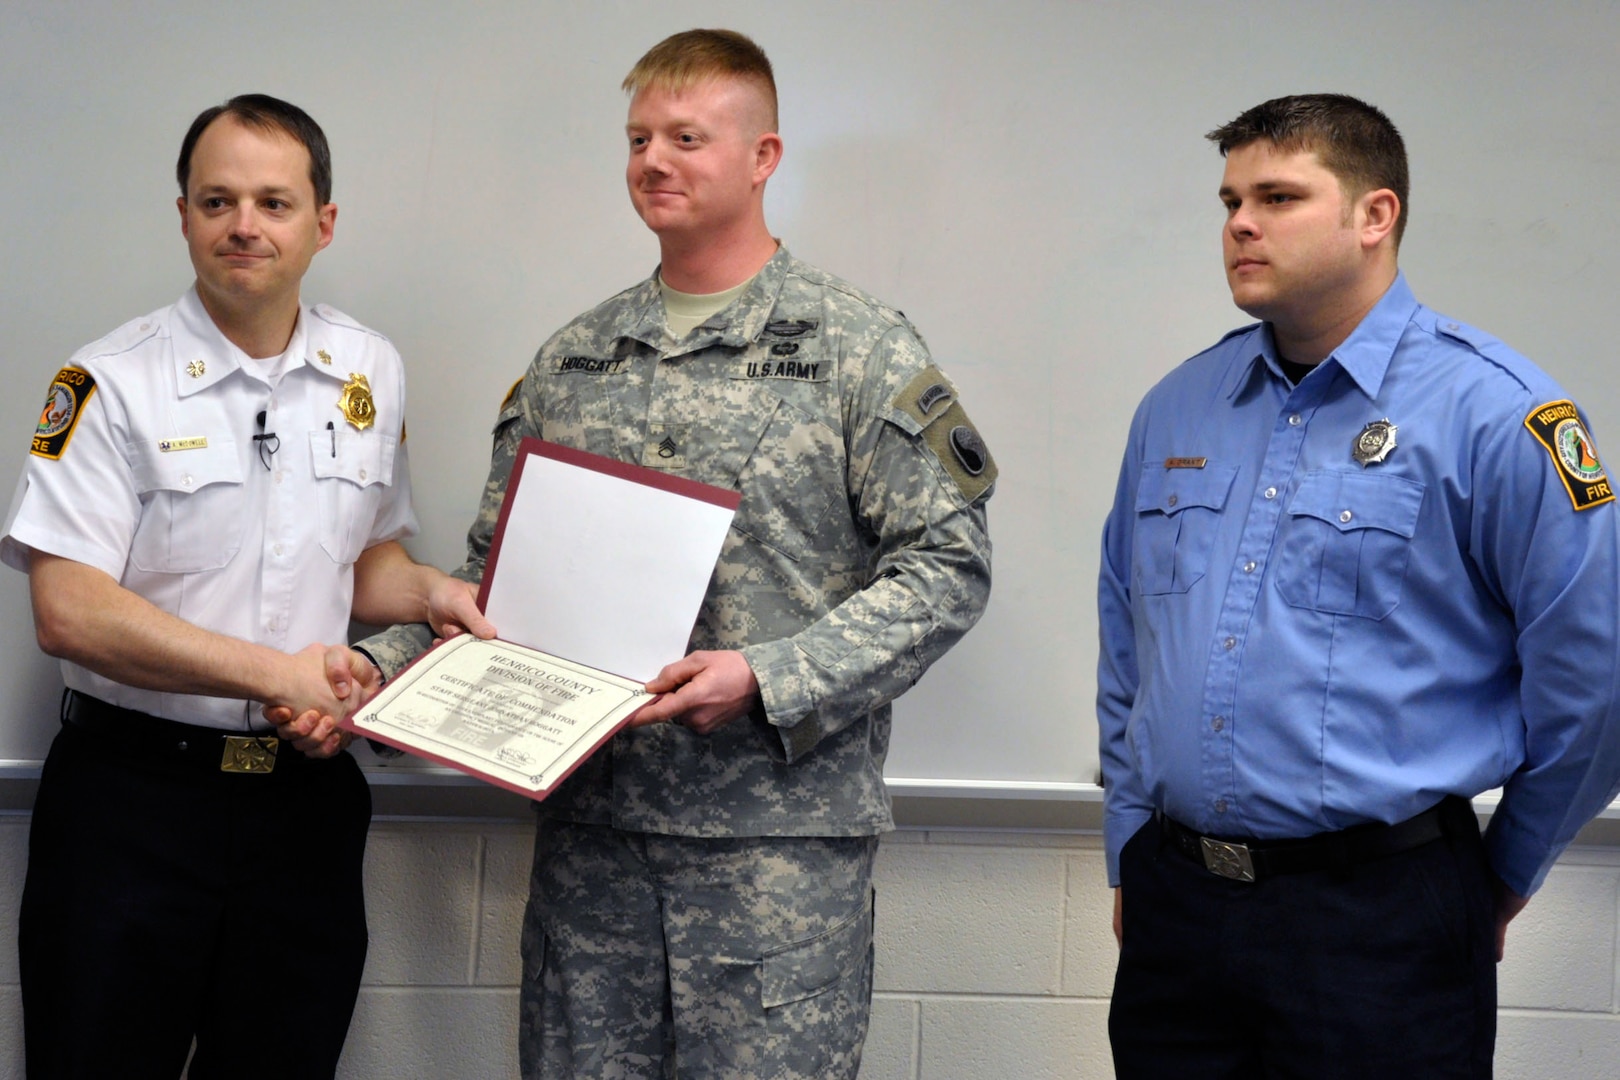 Henrico County Division of Fire Chief Anthony E. McDowell presents a certificate of commendation to Staff Sgt. Johnathan Hoggatt of the Virginia National Guard March 11, 2014